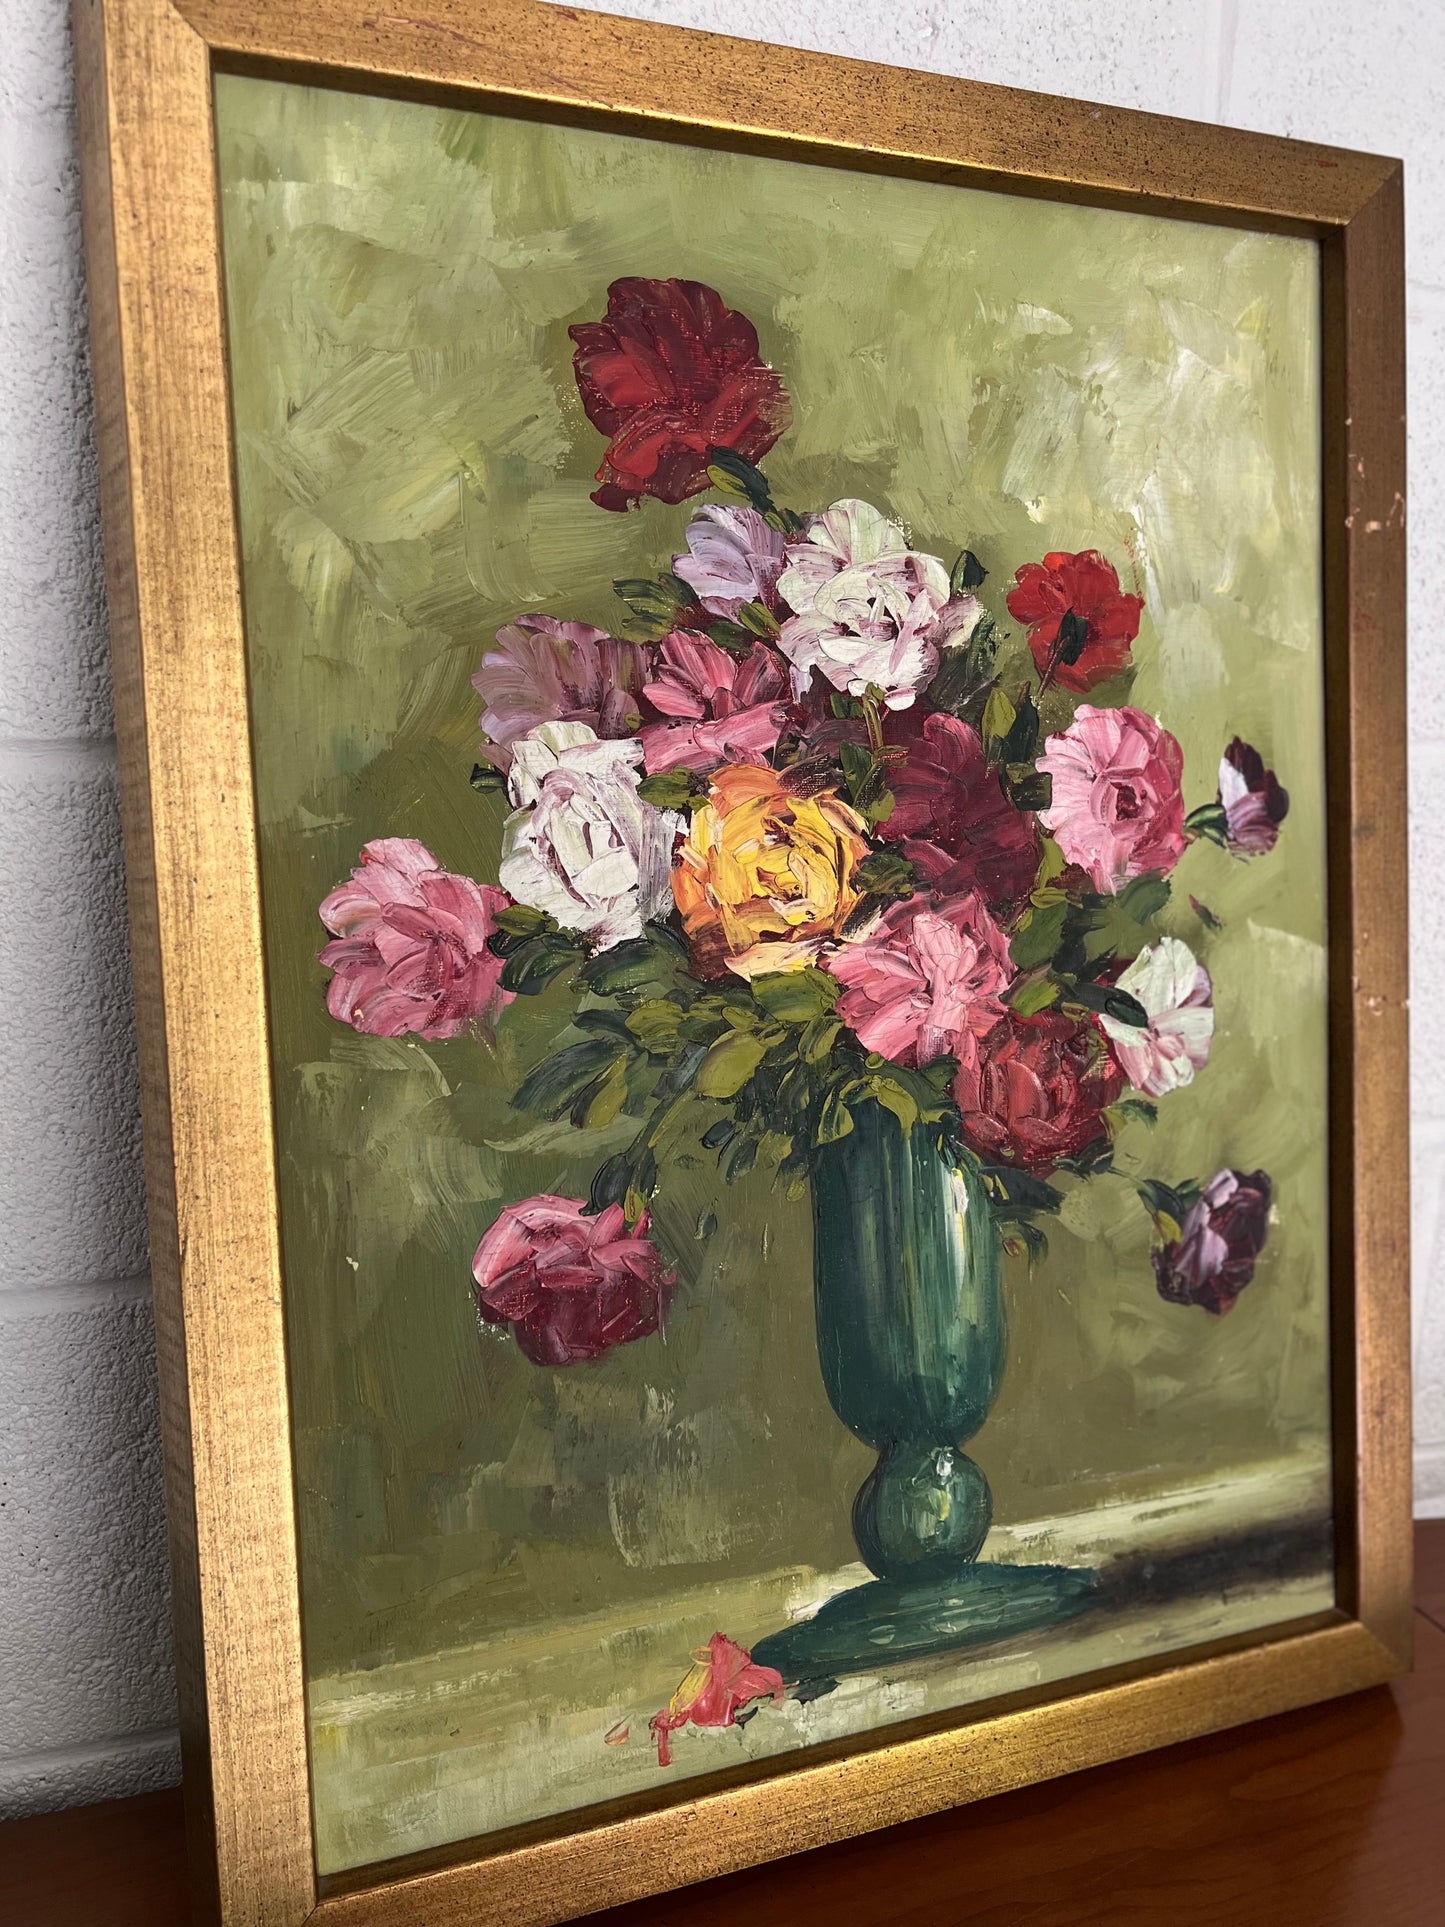 Framed Flower Bouquet Oil Painting on Canvas - Signed by Artist